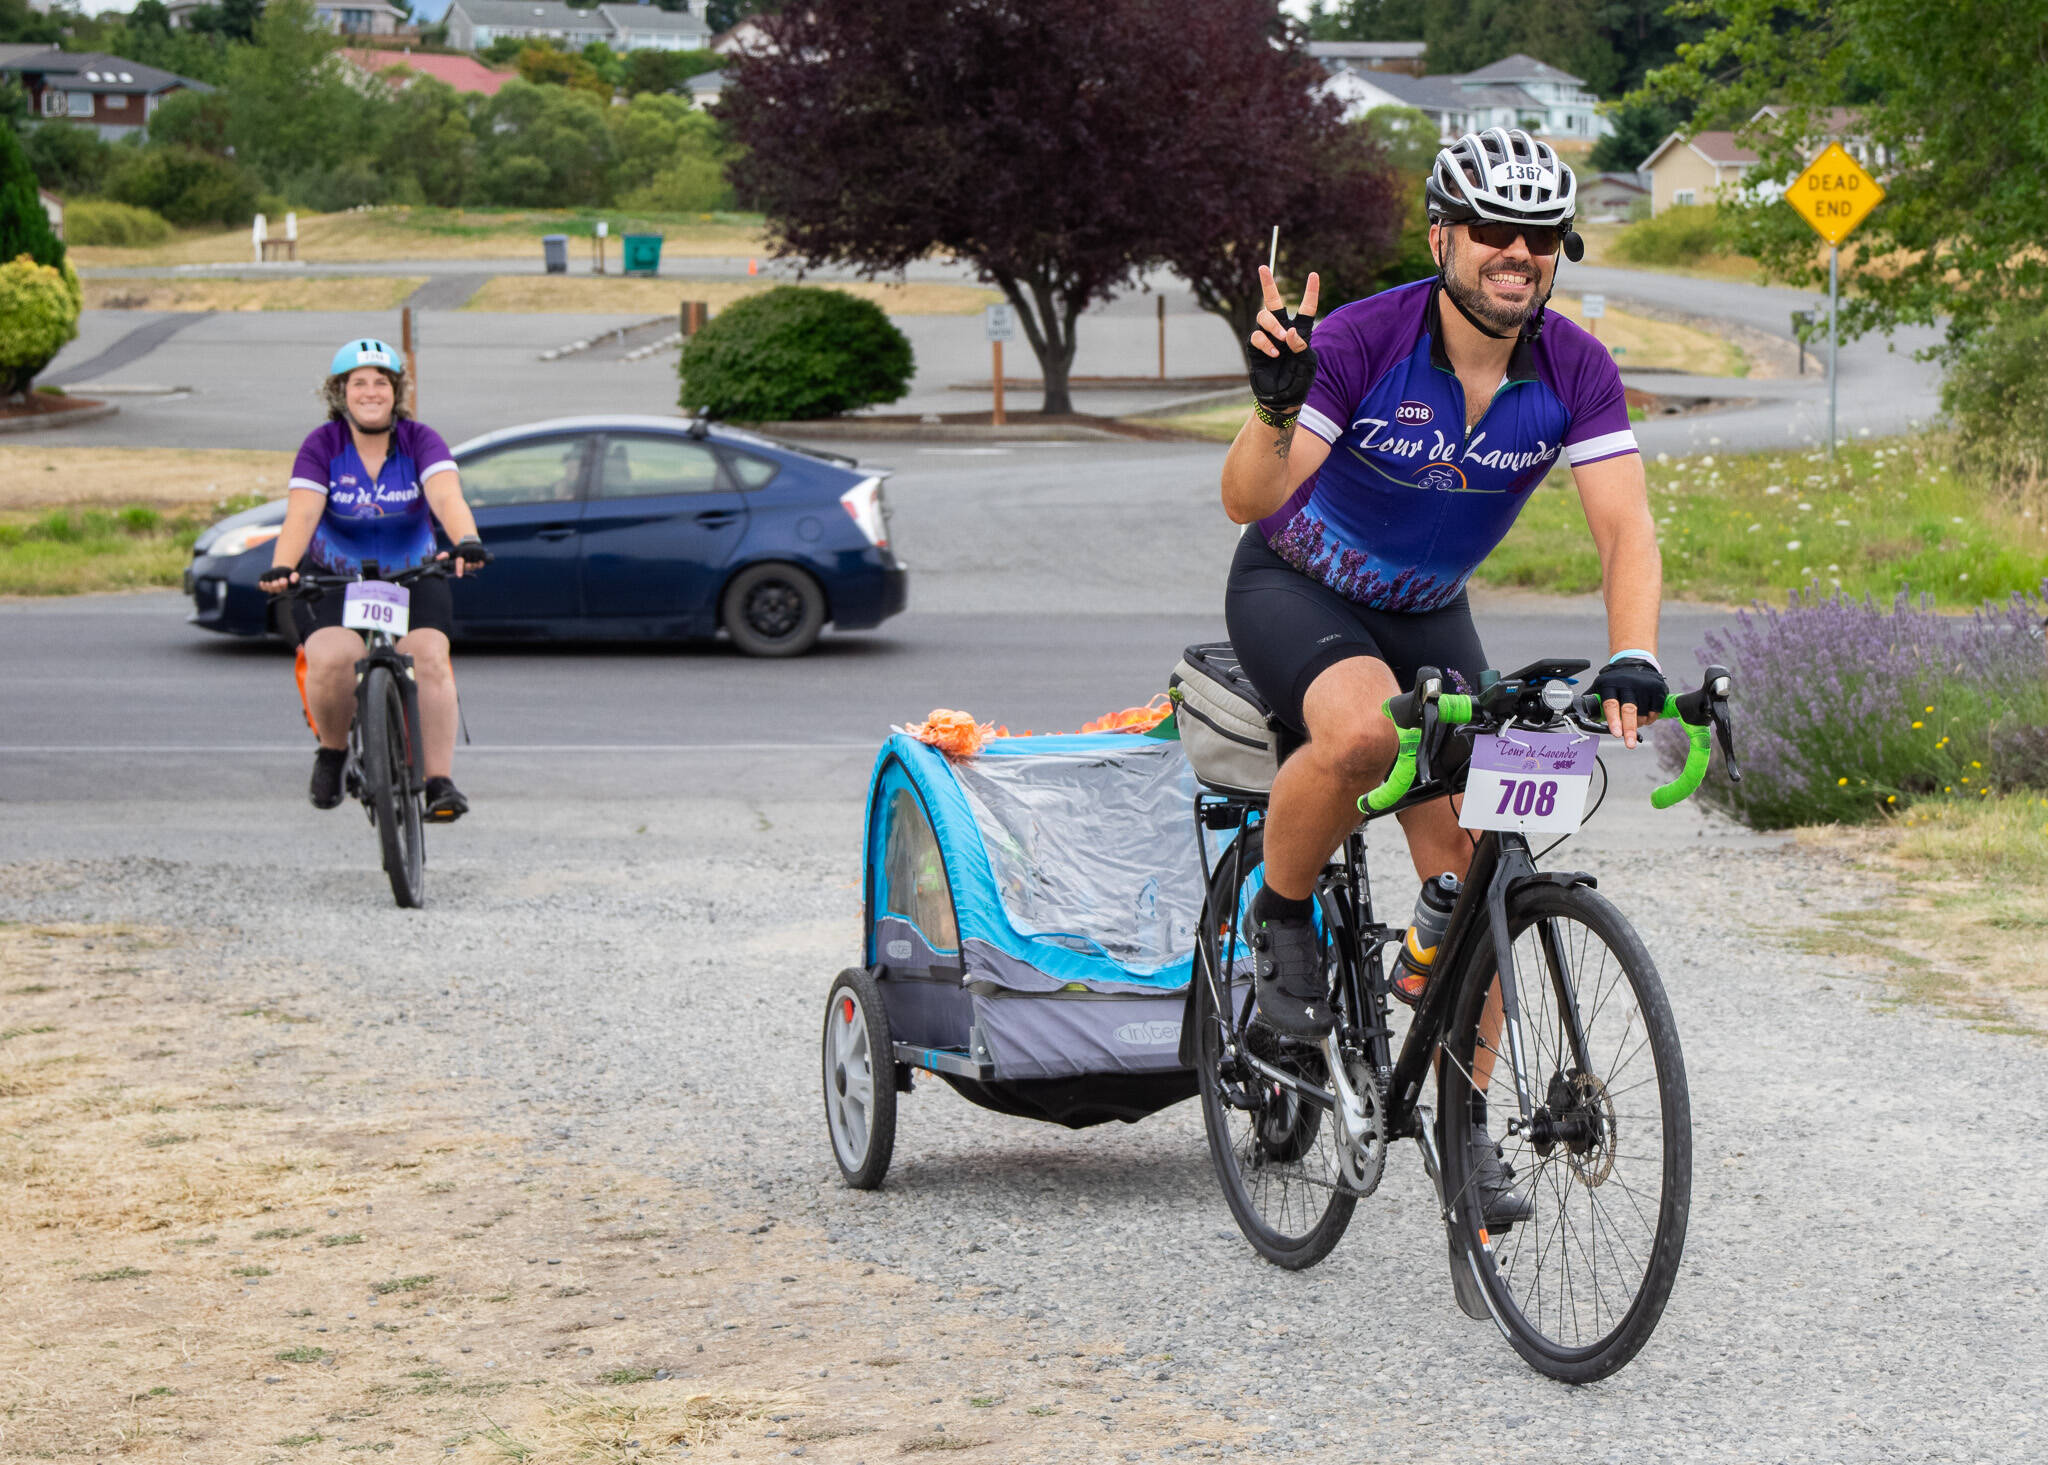 Stephen Fisher, from the Kenmore area, tows 2-year-old Juniper and pugs Jackie and JoJo, with wife Catherine Creason following. They participated in the couple’s sixth Tour de Lavender this weekend. Creason said they were married during the event five years ago. (Emily Matthiessen/Olympic Peninsula News Group)